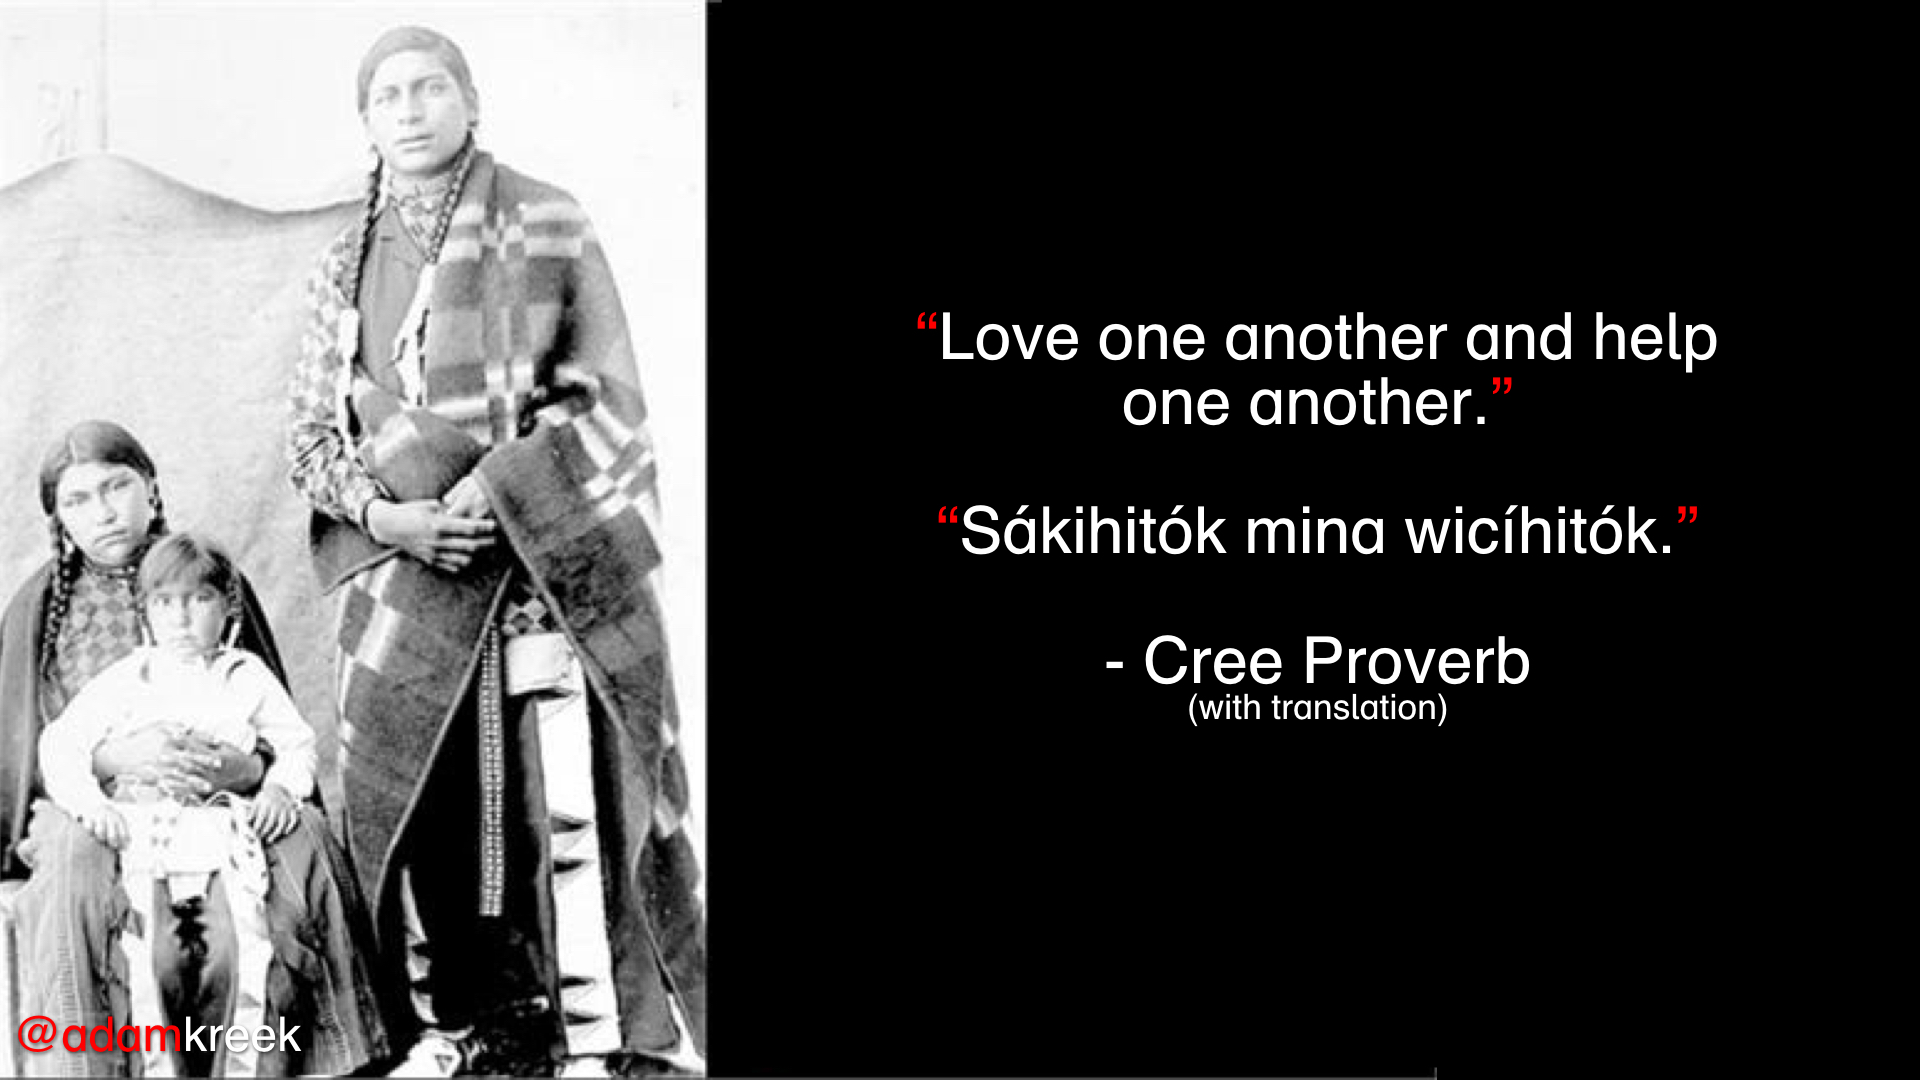 Lonliness: Love one another and help one another. - Cree Proverb